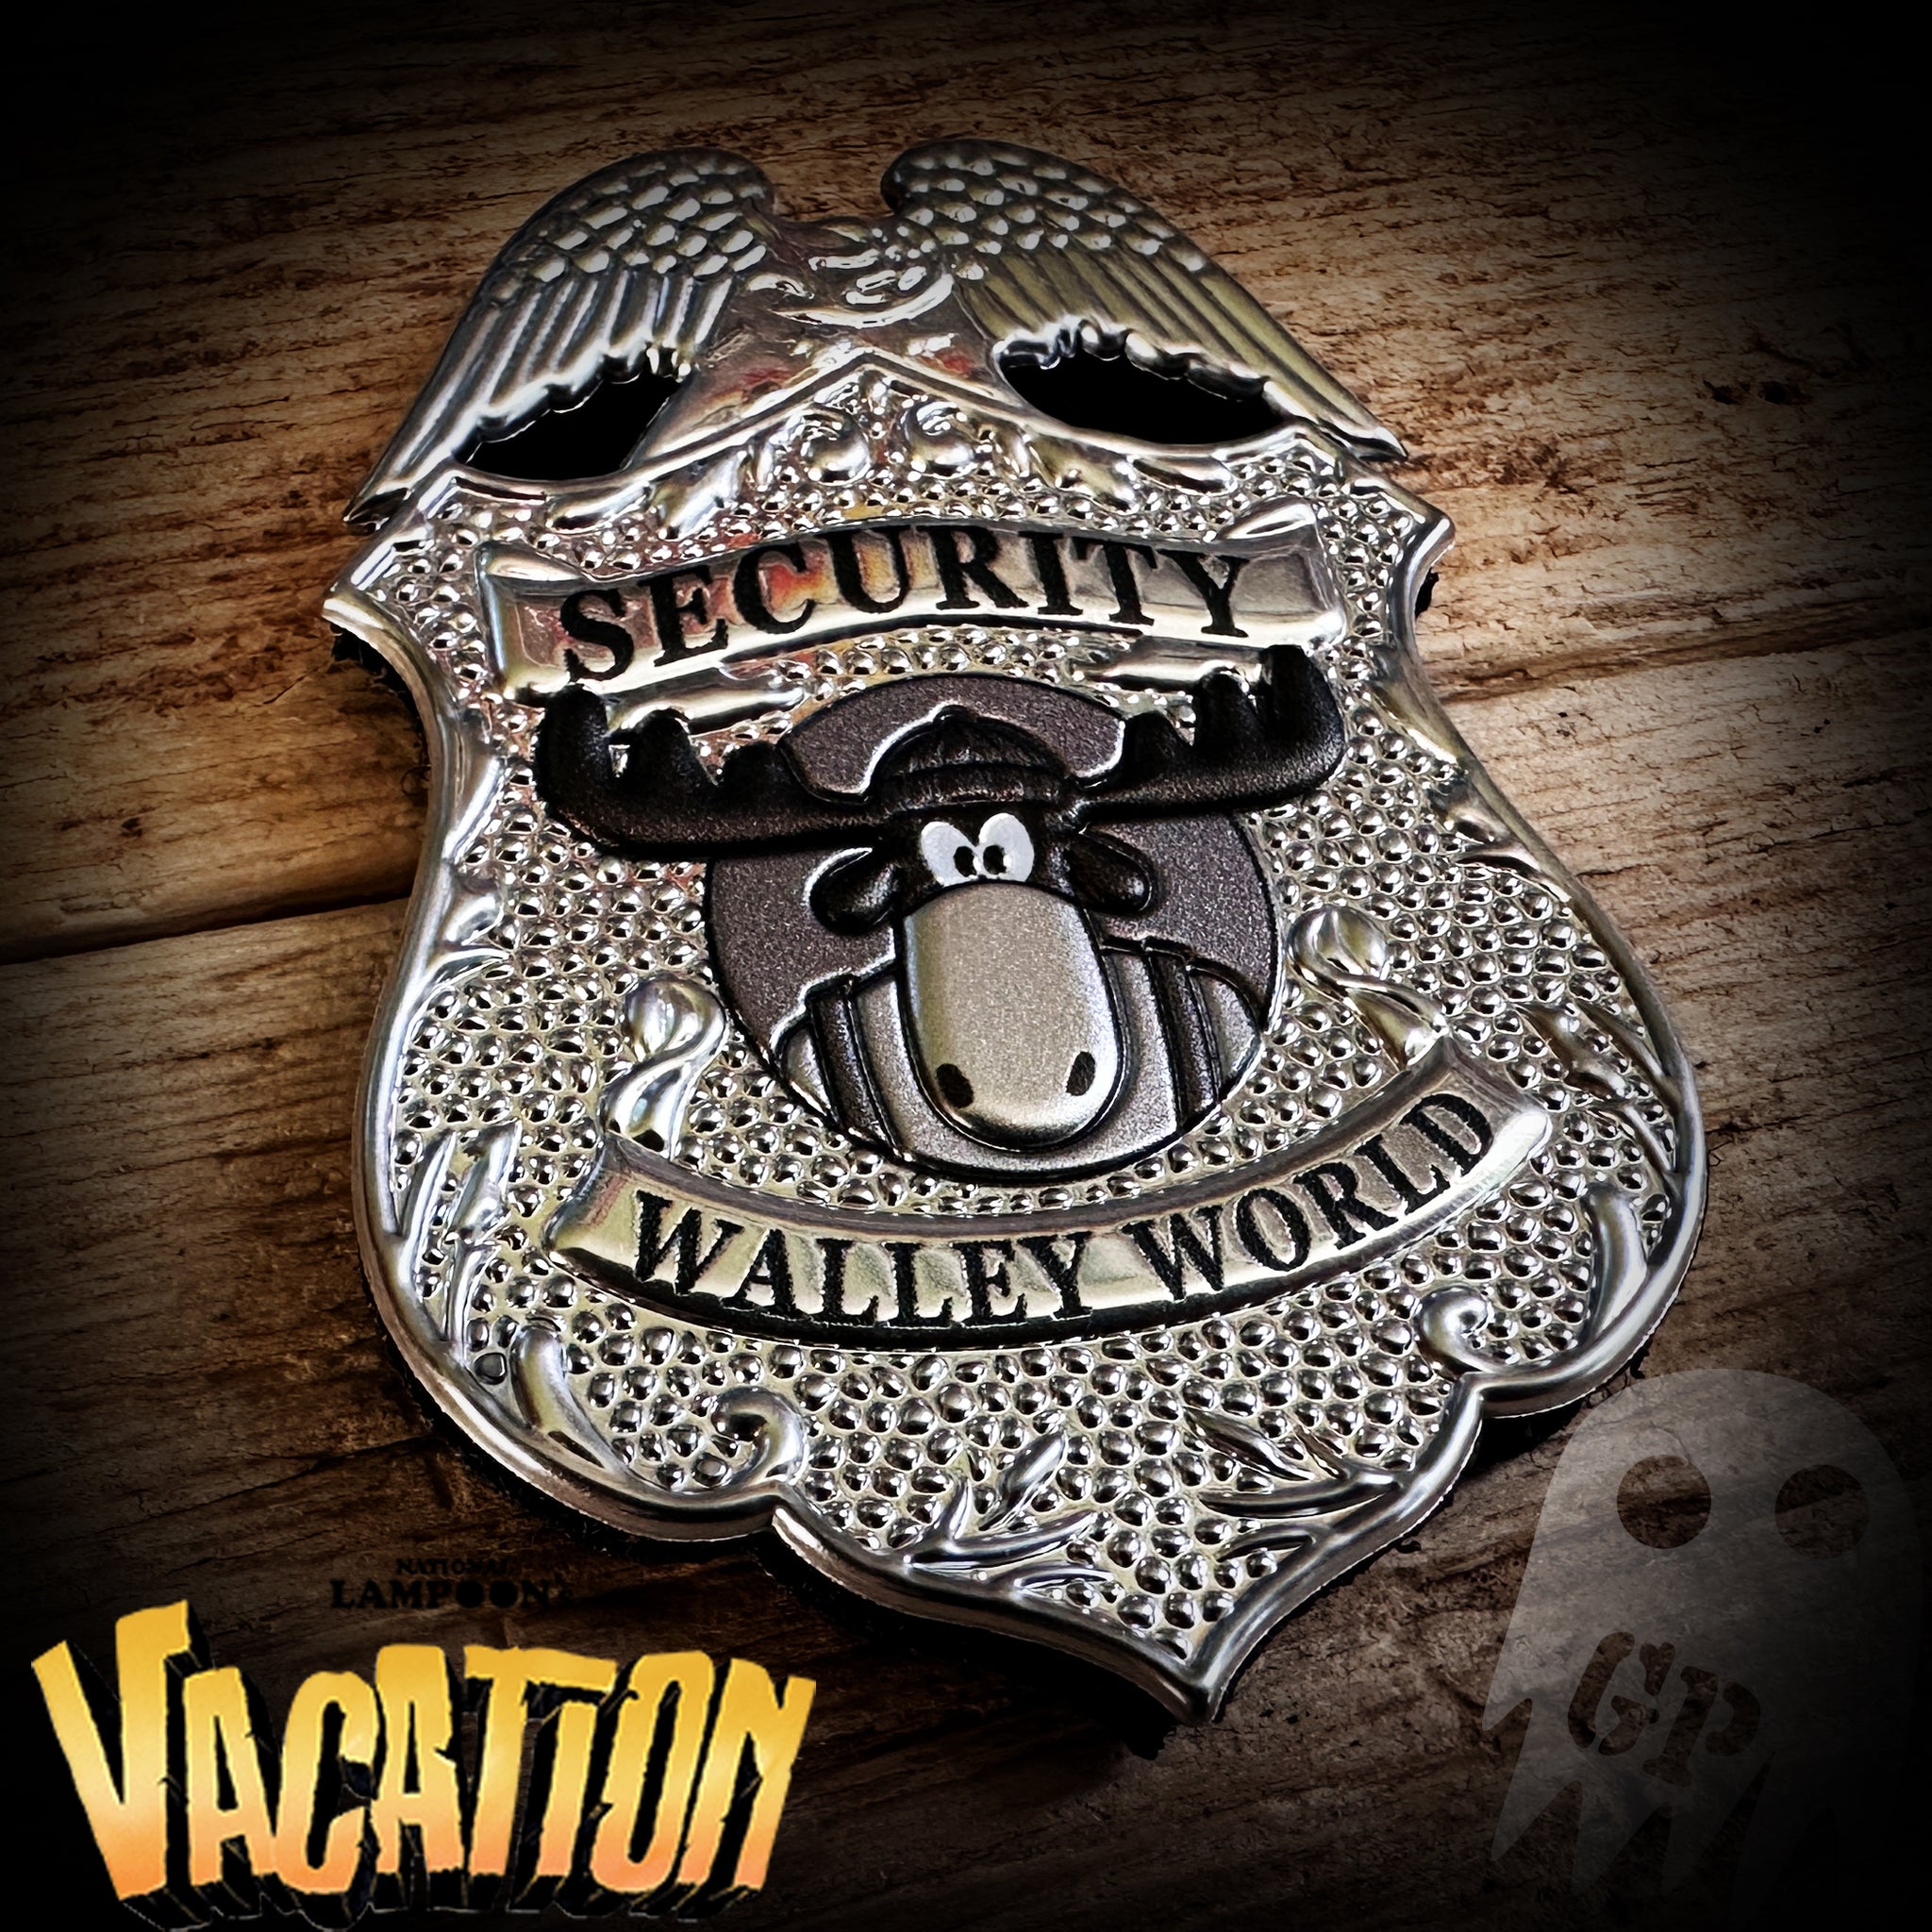 BADGE - Walley World Security Badge - National Lampoon's Vacation – GHOST  PATCH